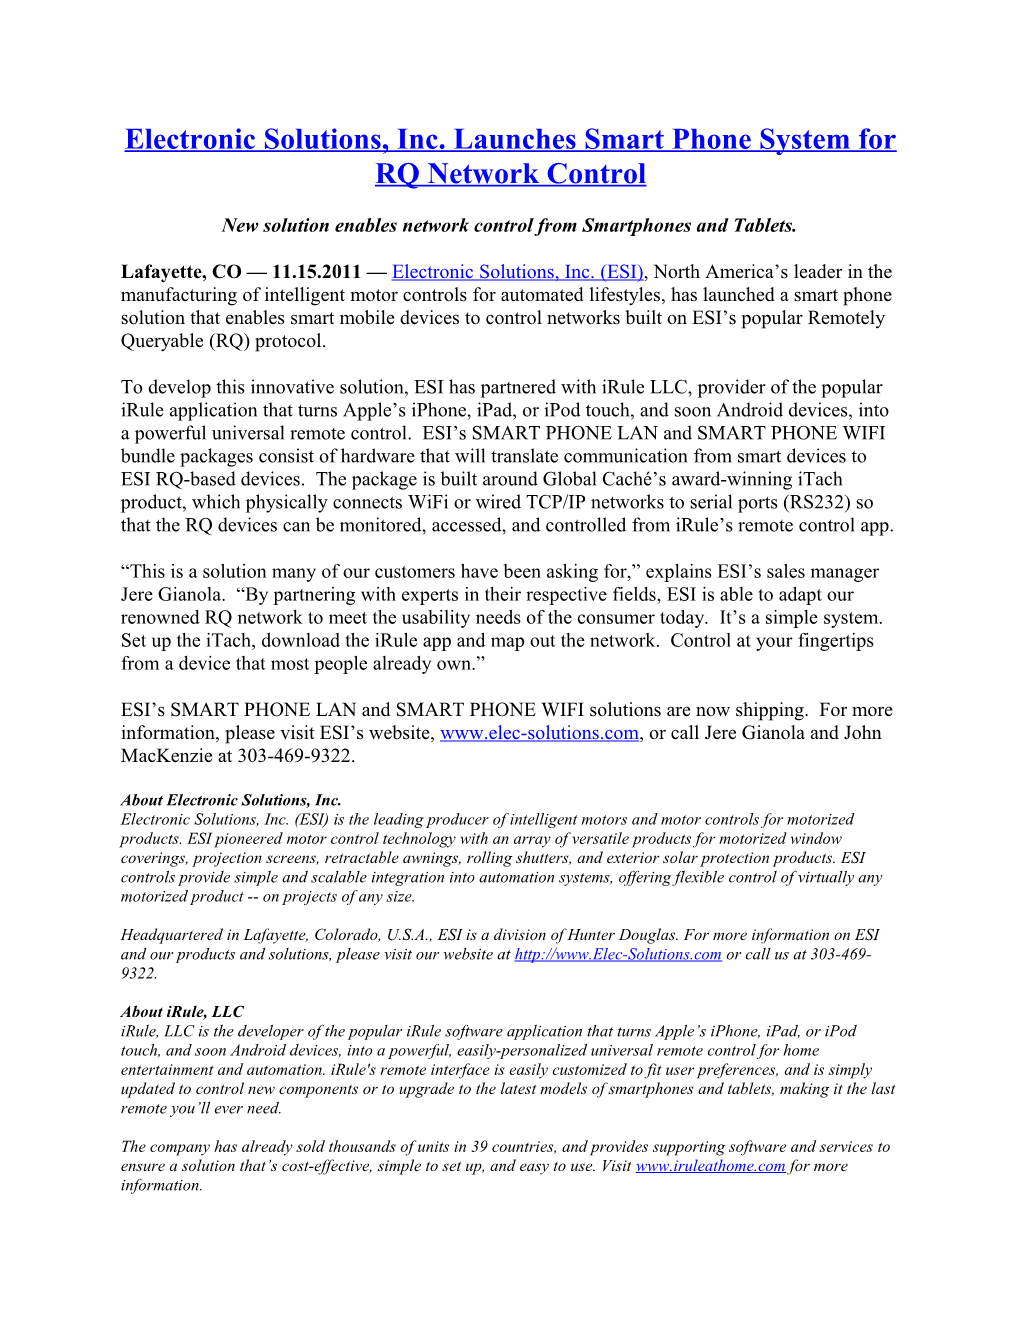 Electronic Solutions, Inc. Launches Smart Phone System for RQ Network Control